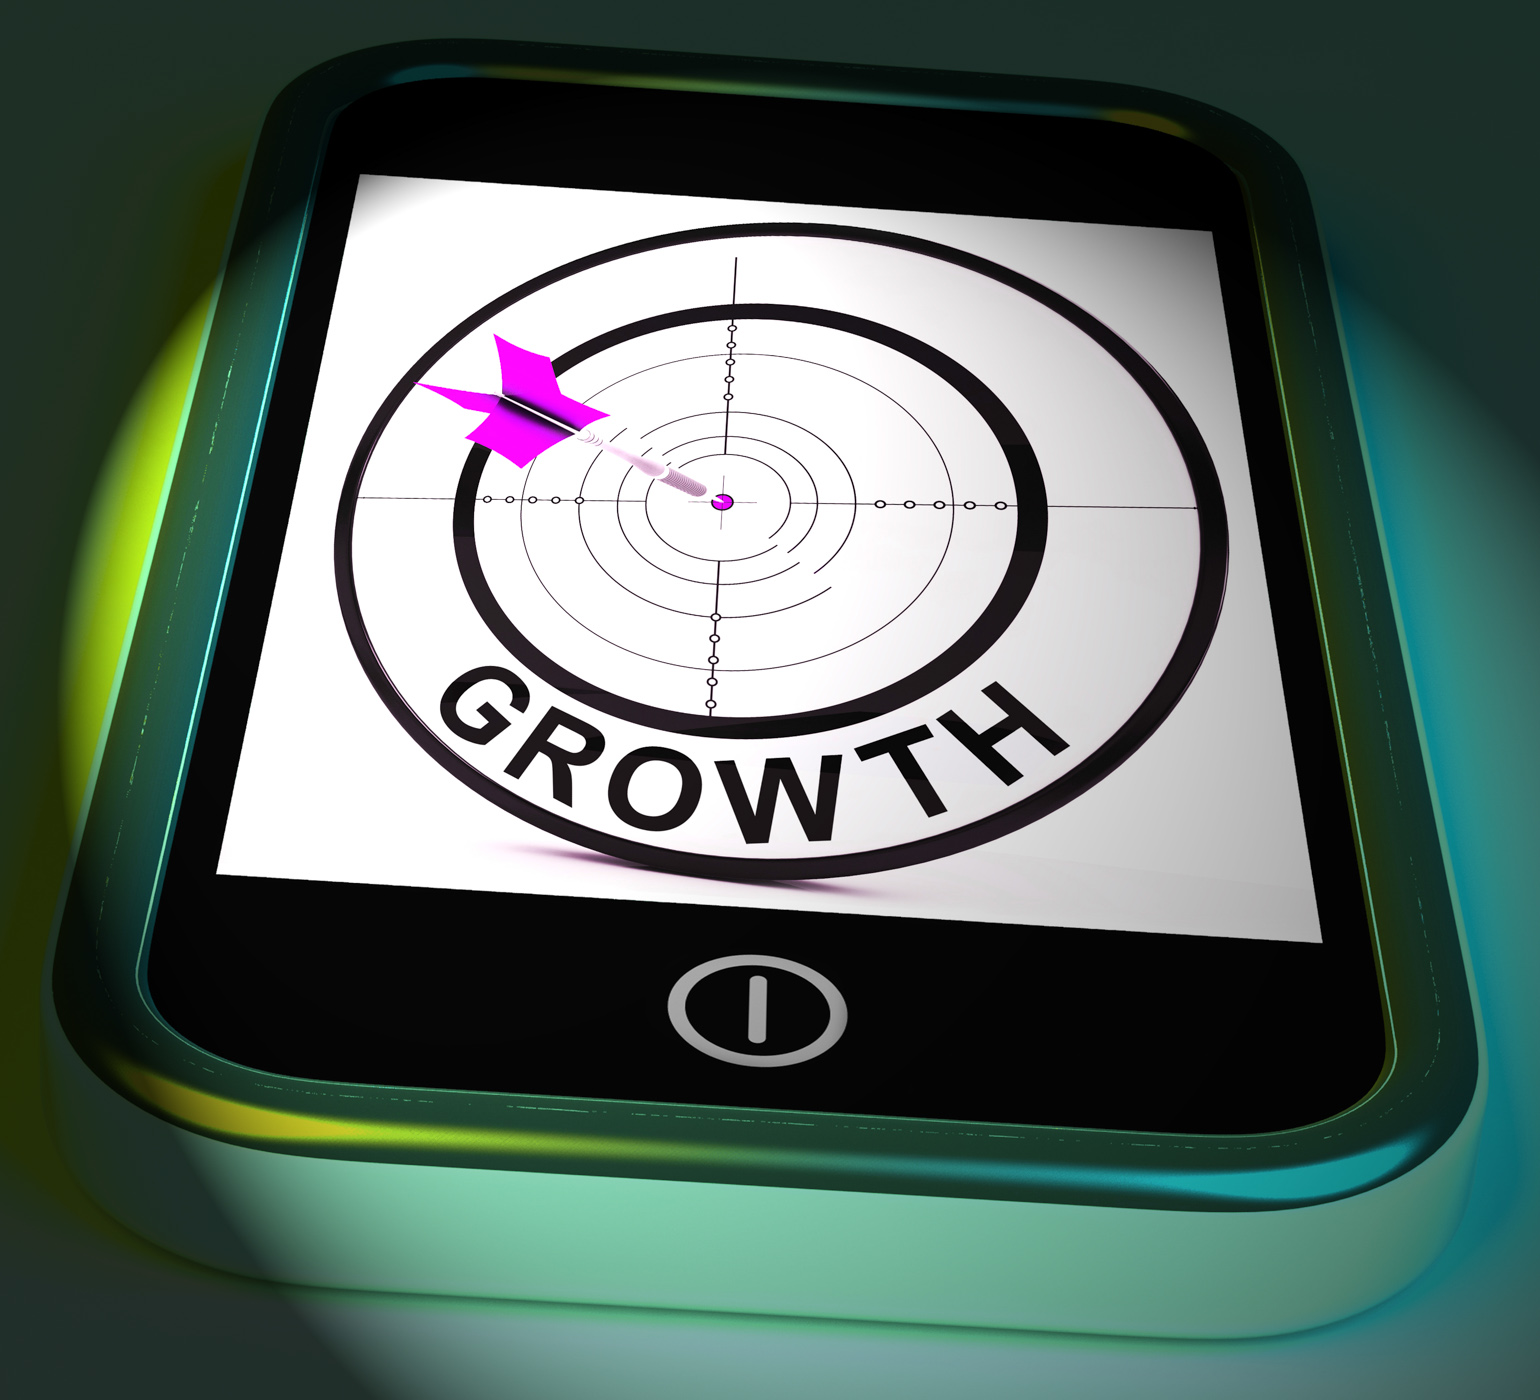 Growth smartphone displays expansion and advancement through internet photo